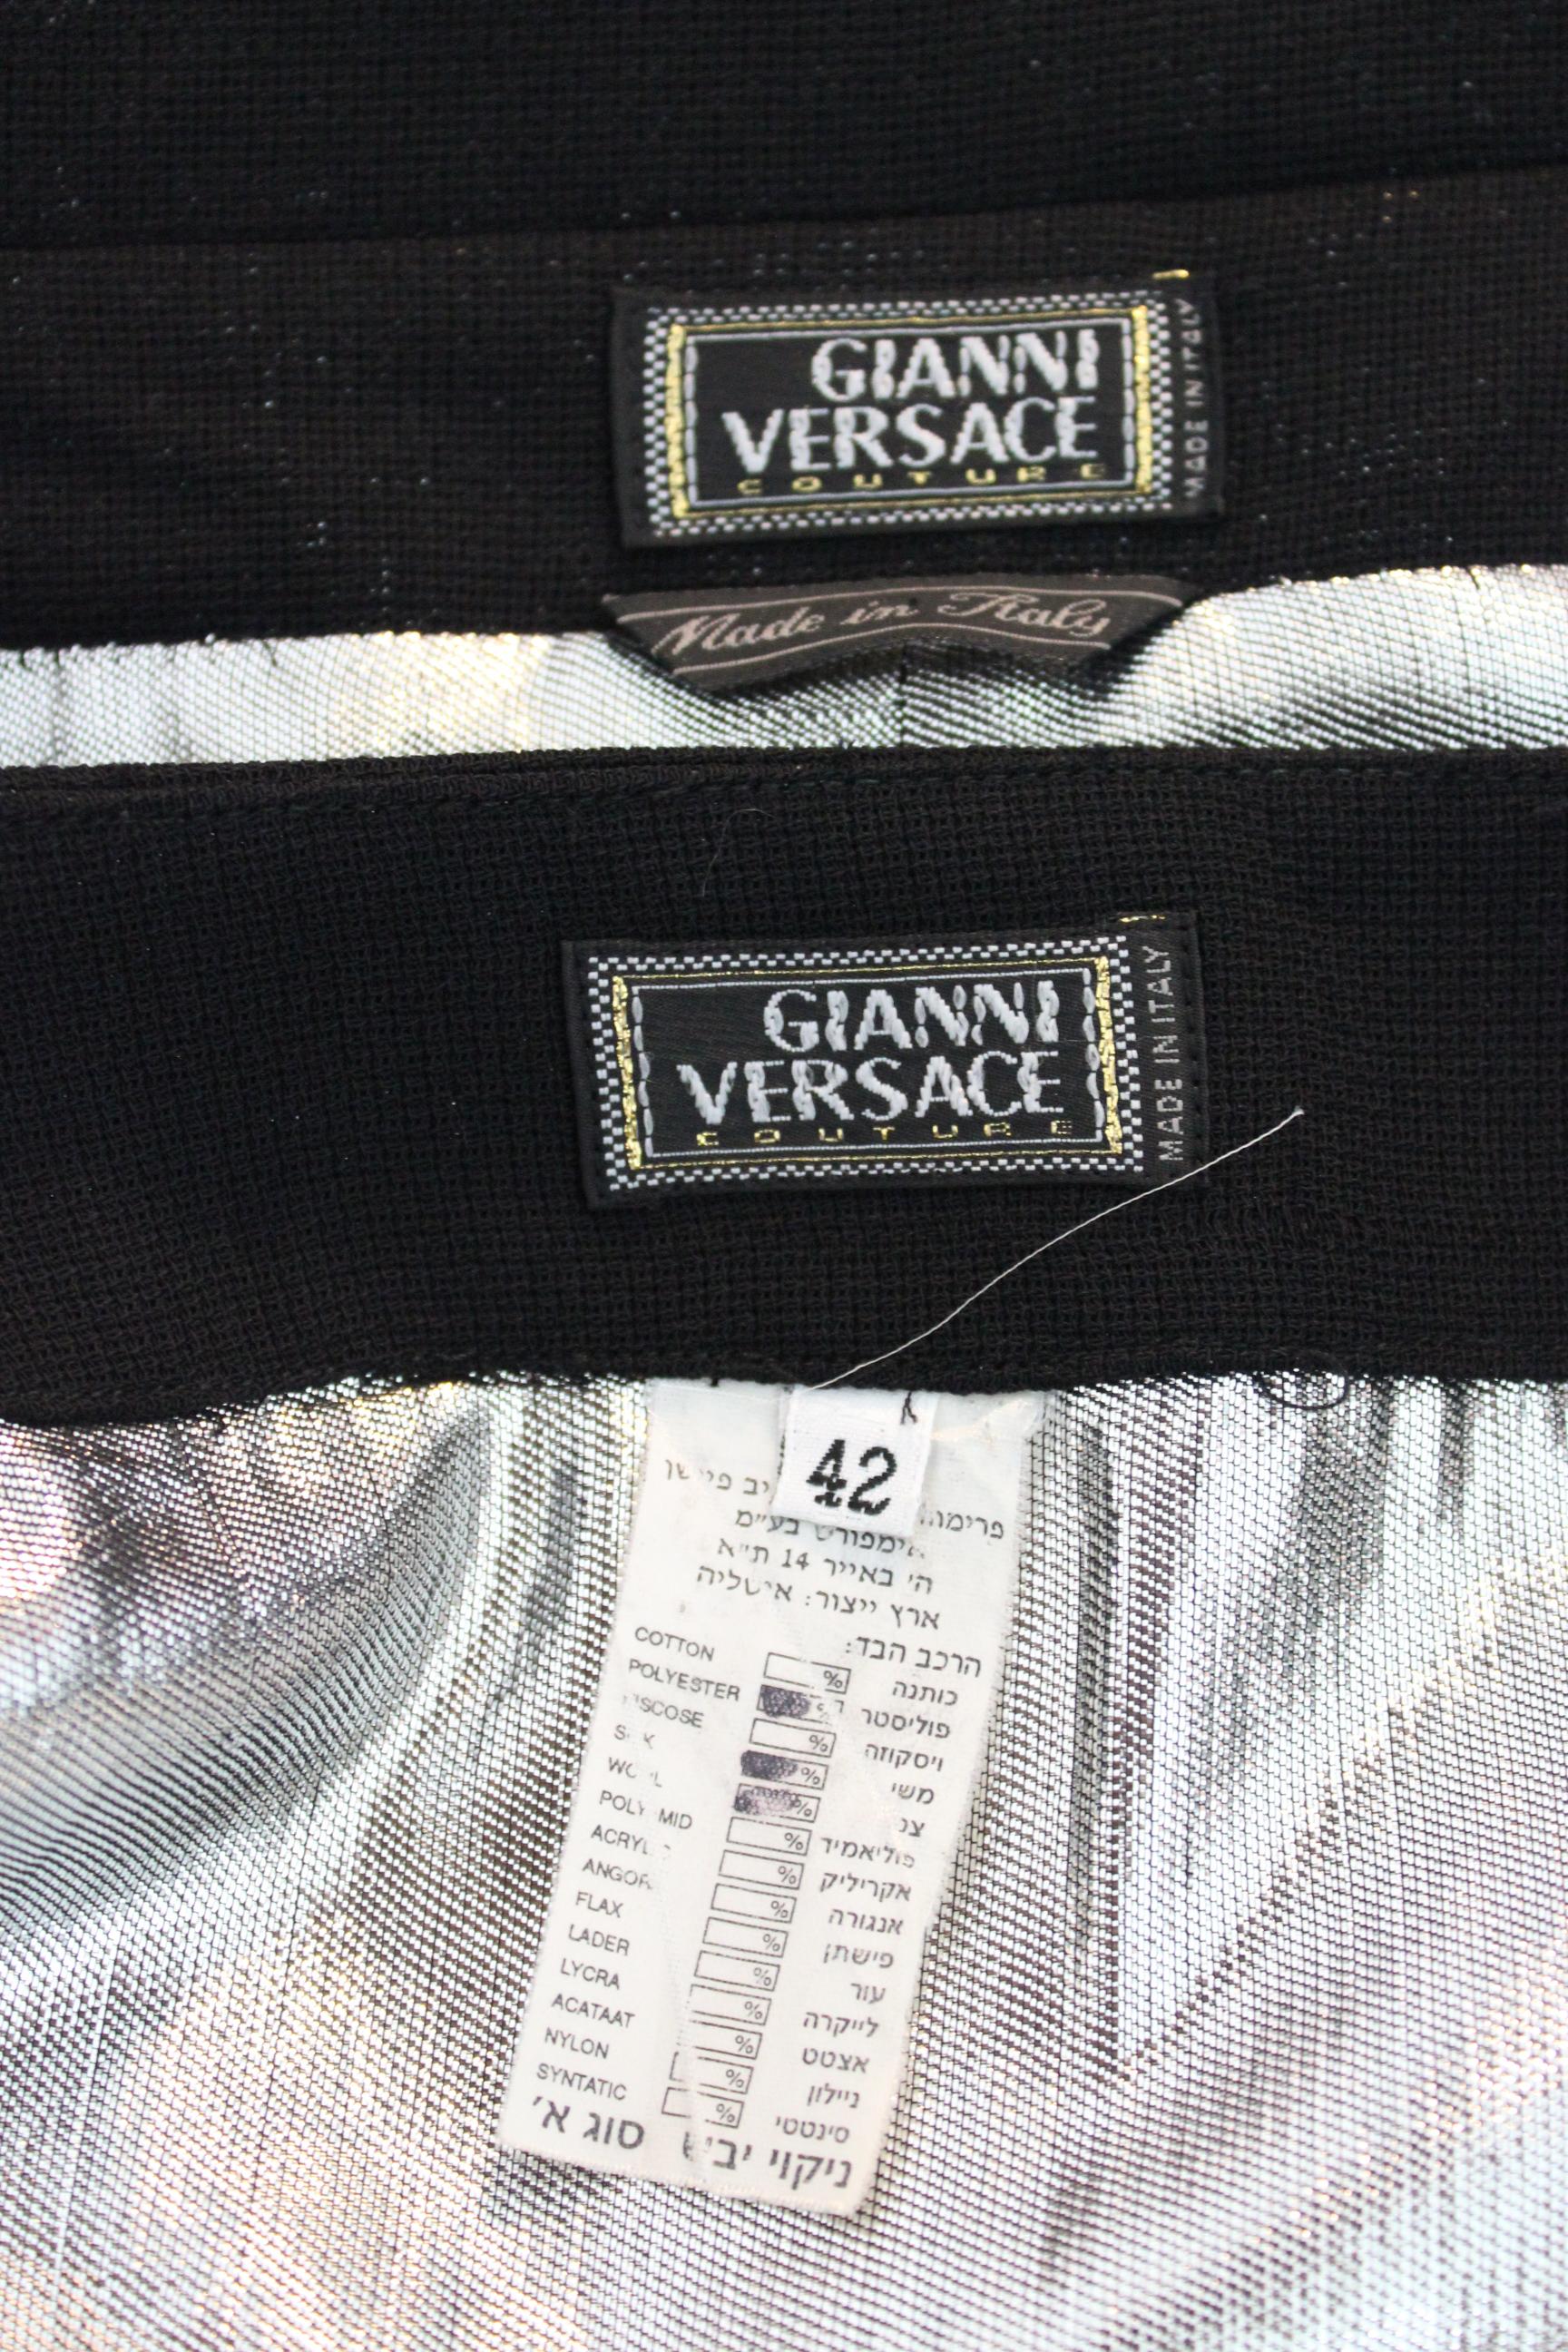 Gianni Versace Couture Black Silver Silk Wool Lamè Evening Skirt Suit 1980s For Sale 3